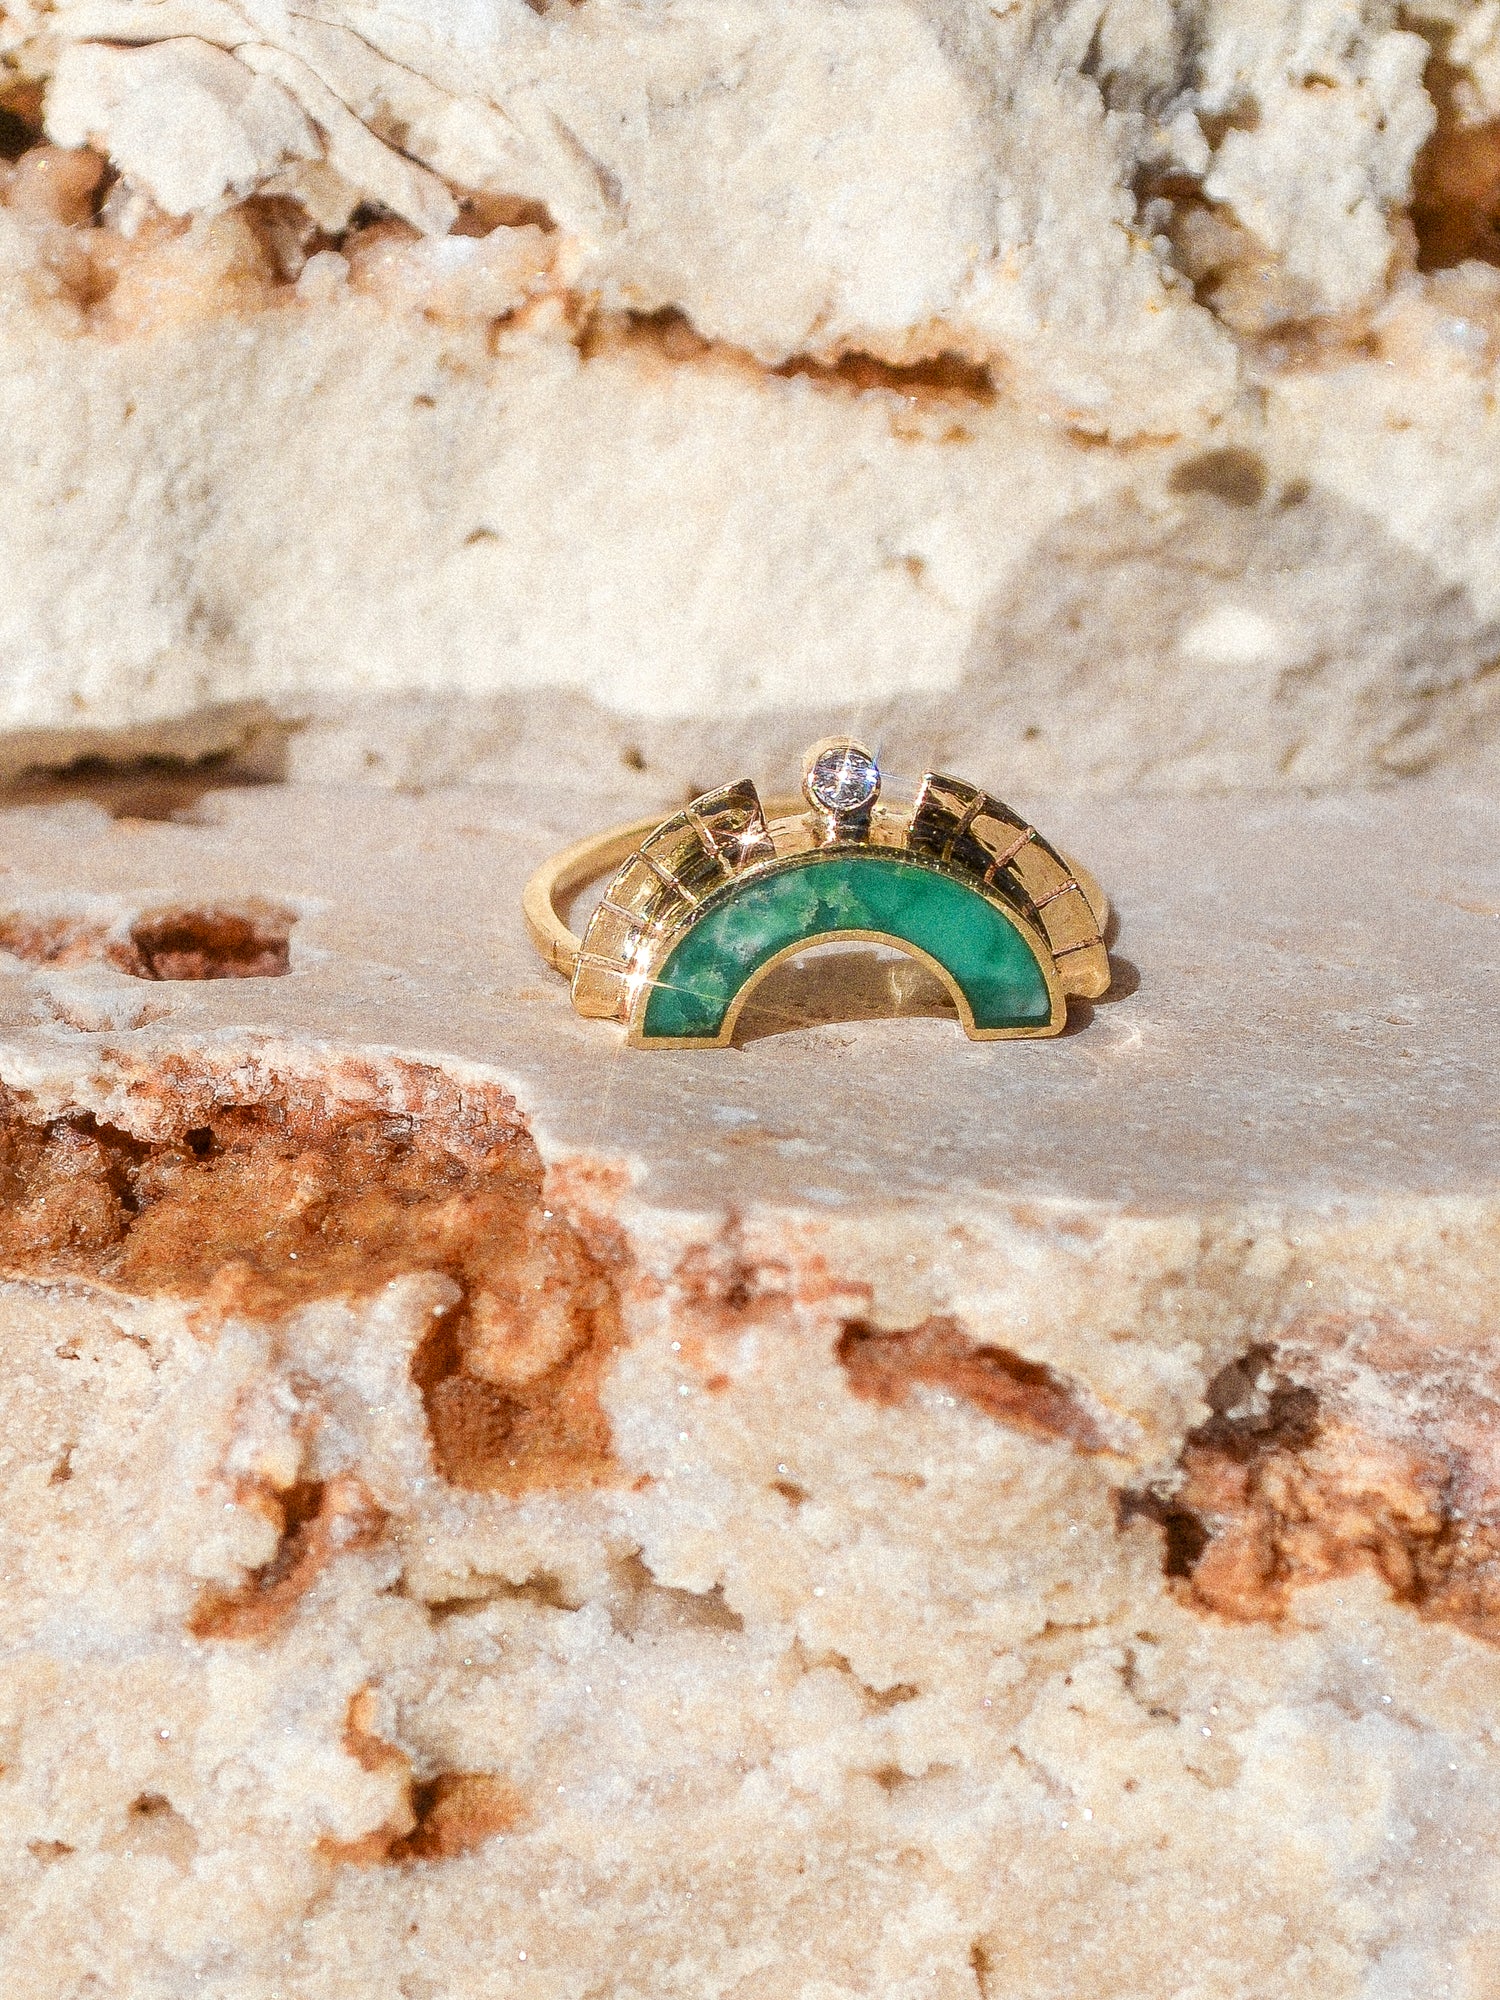 RISING SOL ARCH CROWN / The inlaid Broken Arrow turquoise is hand cut and shaped to fit perfectly inside this 14K gold bezel. A Young in the Mountain signature carved halo features a .03 ct conflict-free white diamond that brings beautiful light to this piece